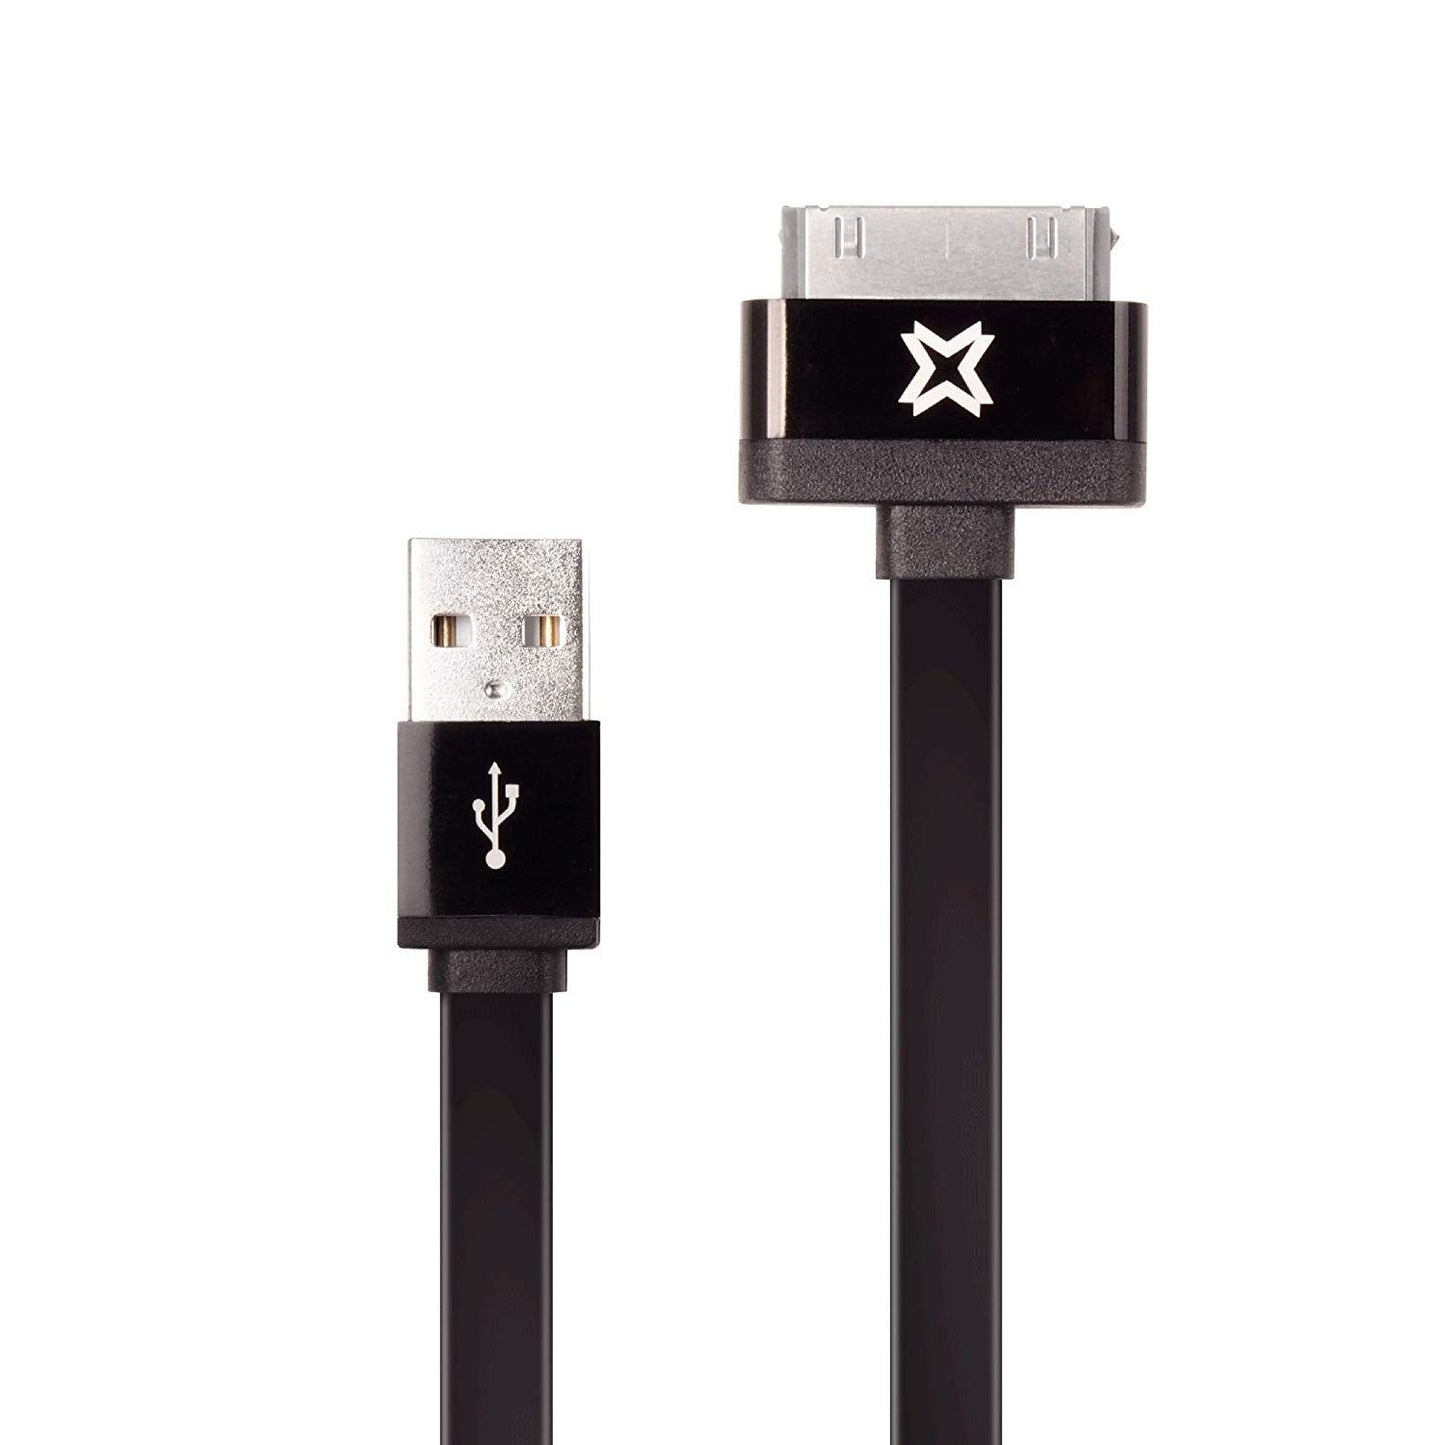 Klevatek - 1.5m (2.4A) USB to MFI 30 Pin Cables for iPhone 4/4S & iPad 2/3/4 - Black